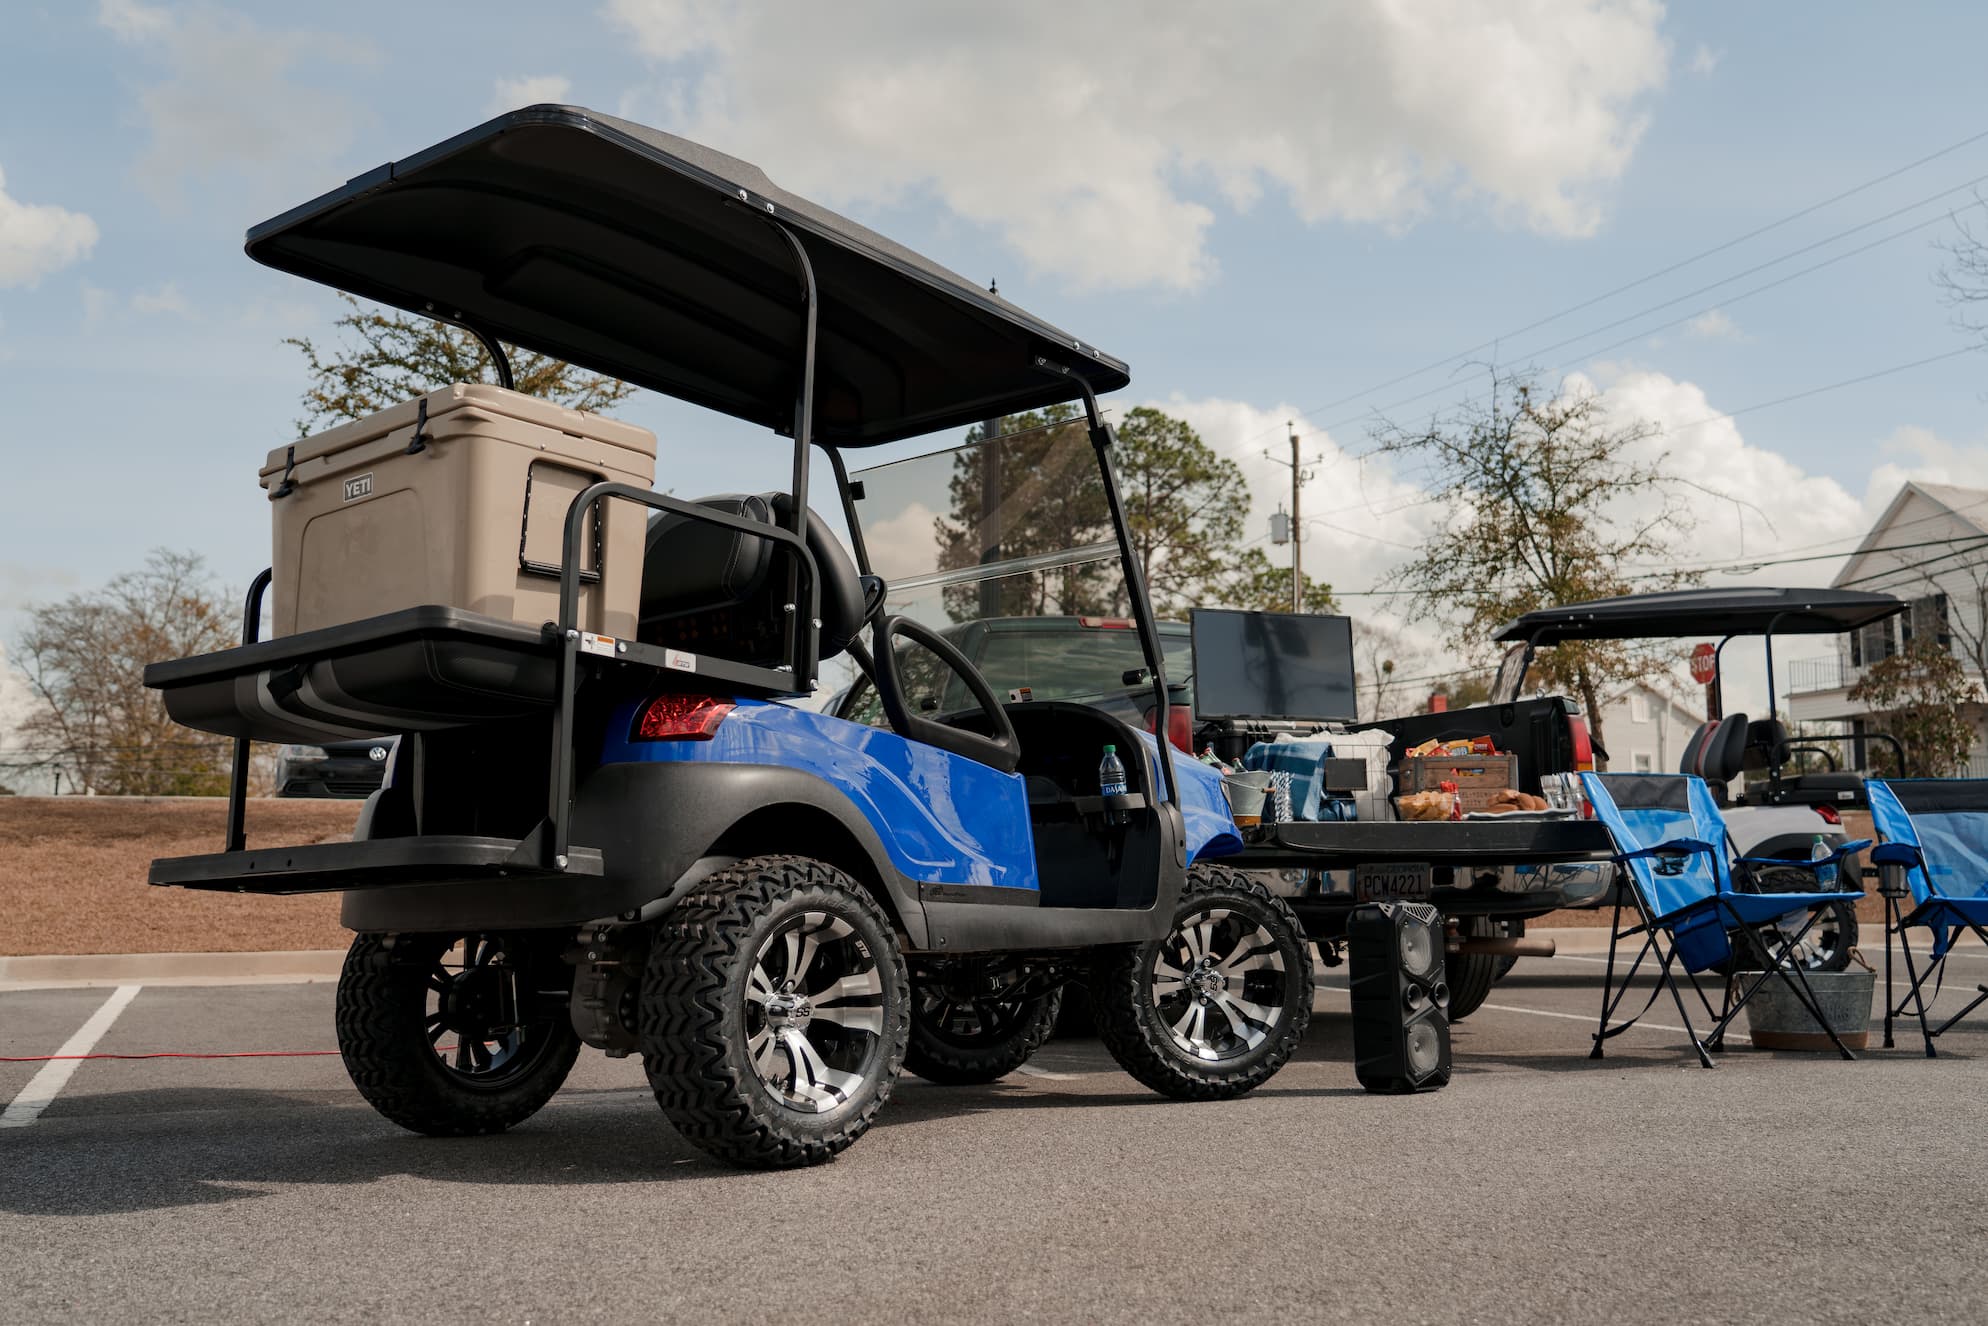 Two Seater Blue Golf Cart with deck | Used Golf Carts for sale | Statesboro Golf Carts